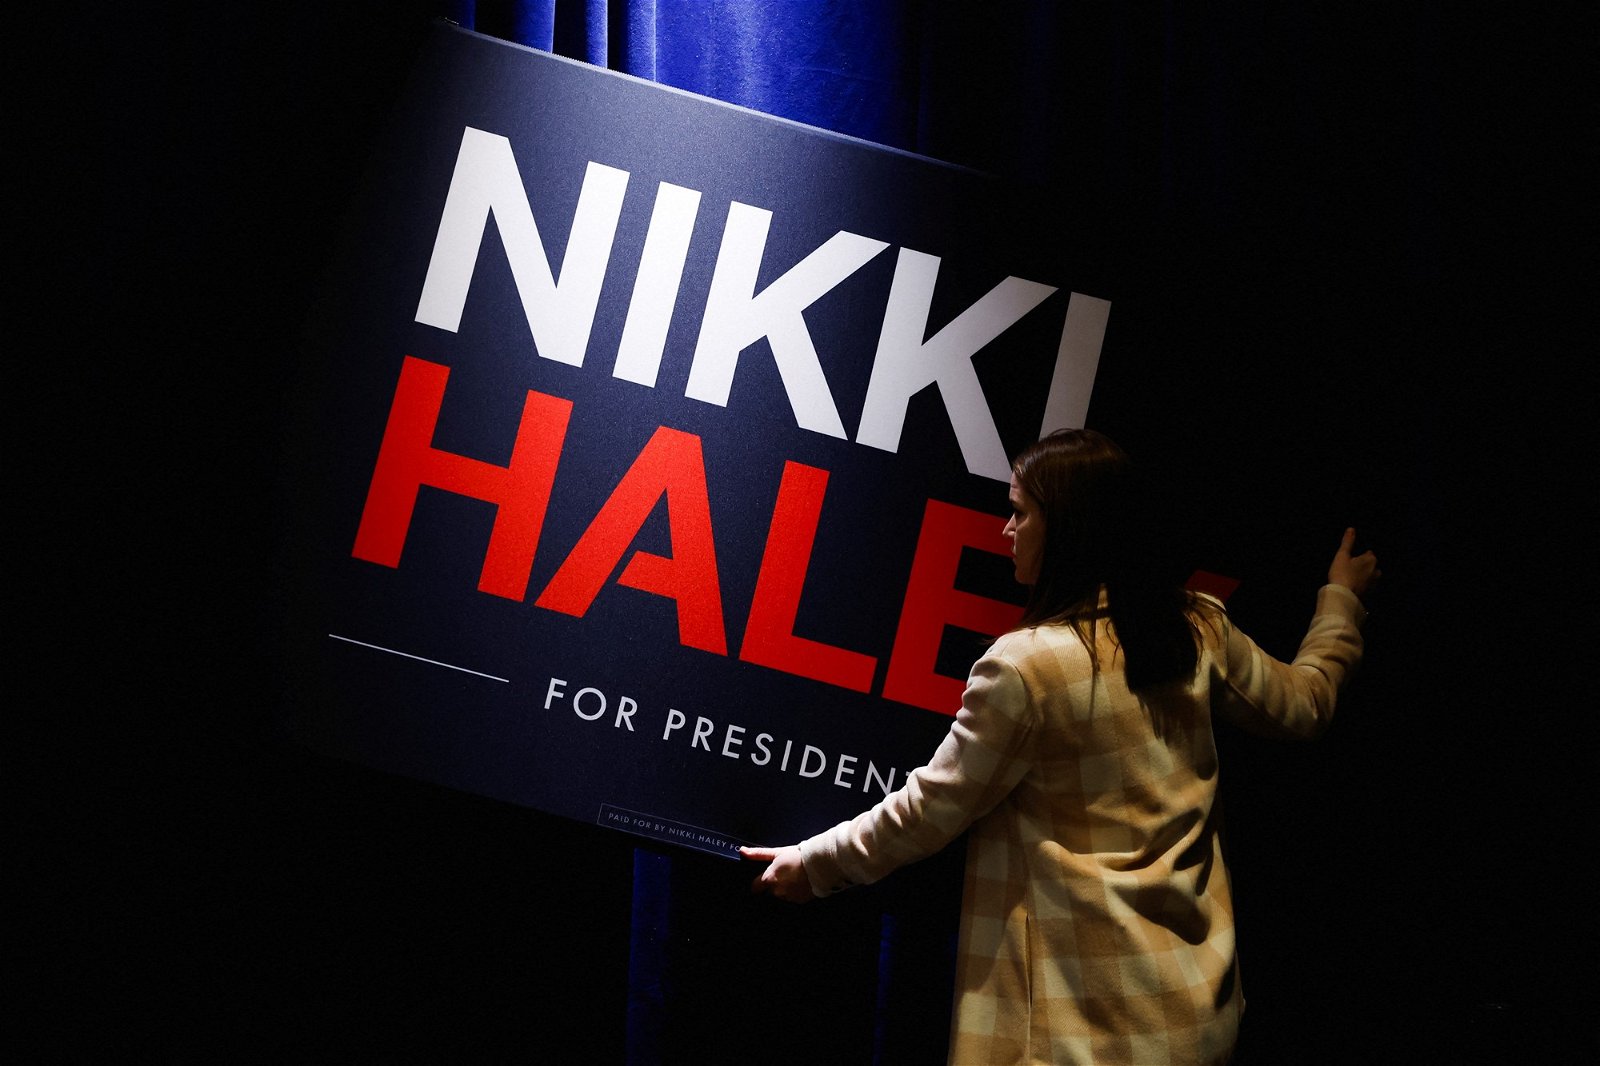 A woman holds up a 'Nikki Haley for President' sign in a shadowy room.